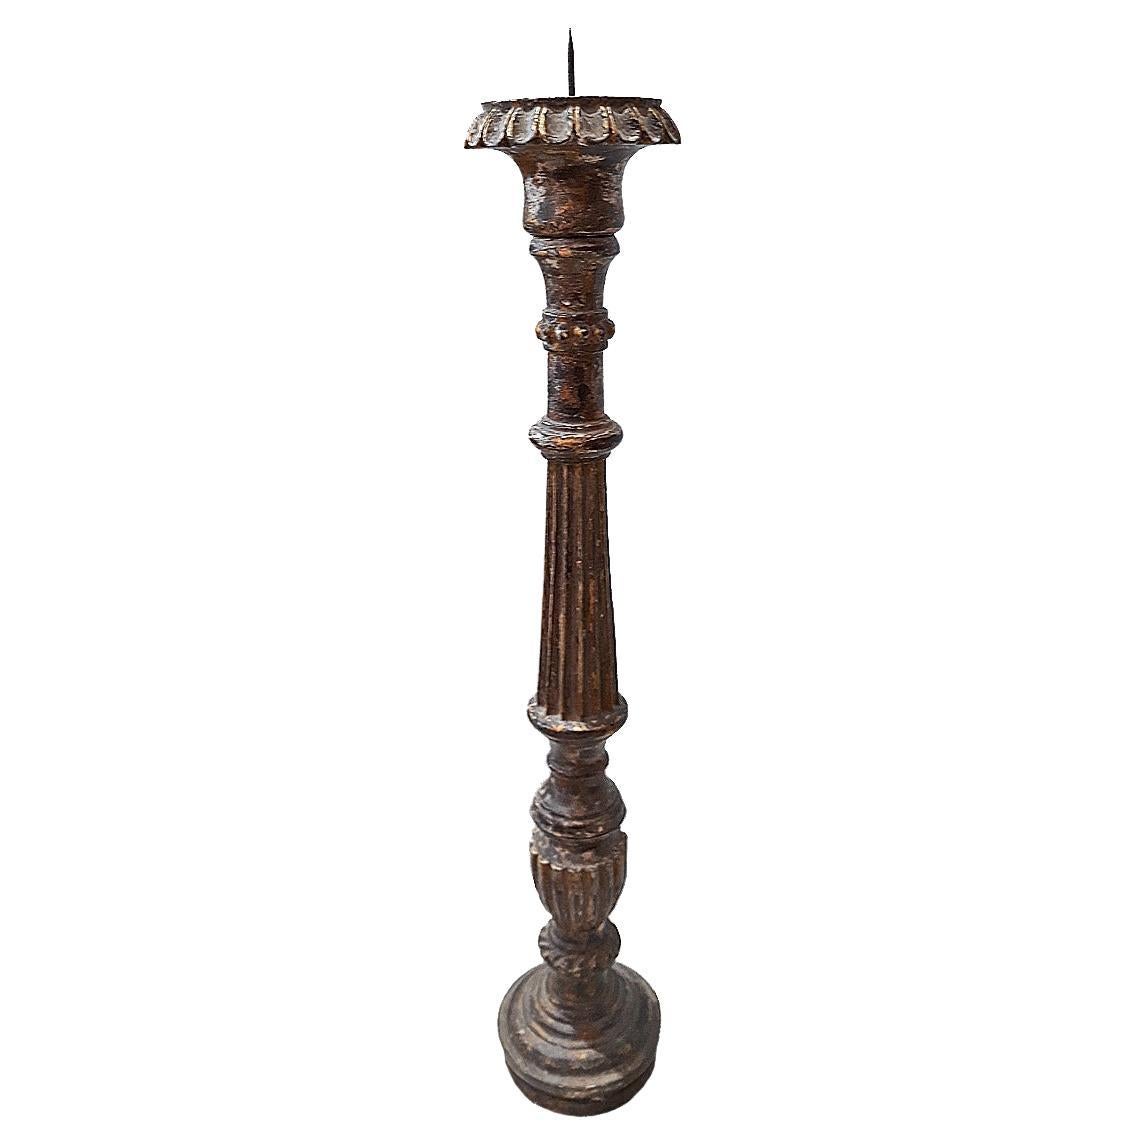 Hand-Carved Wood Candlestick from India, Mid-20th Century